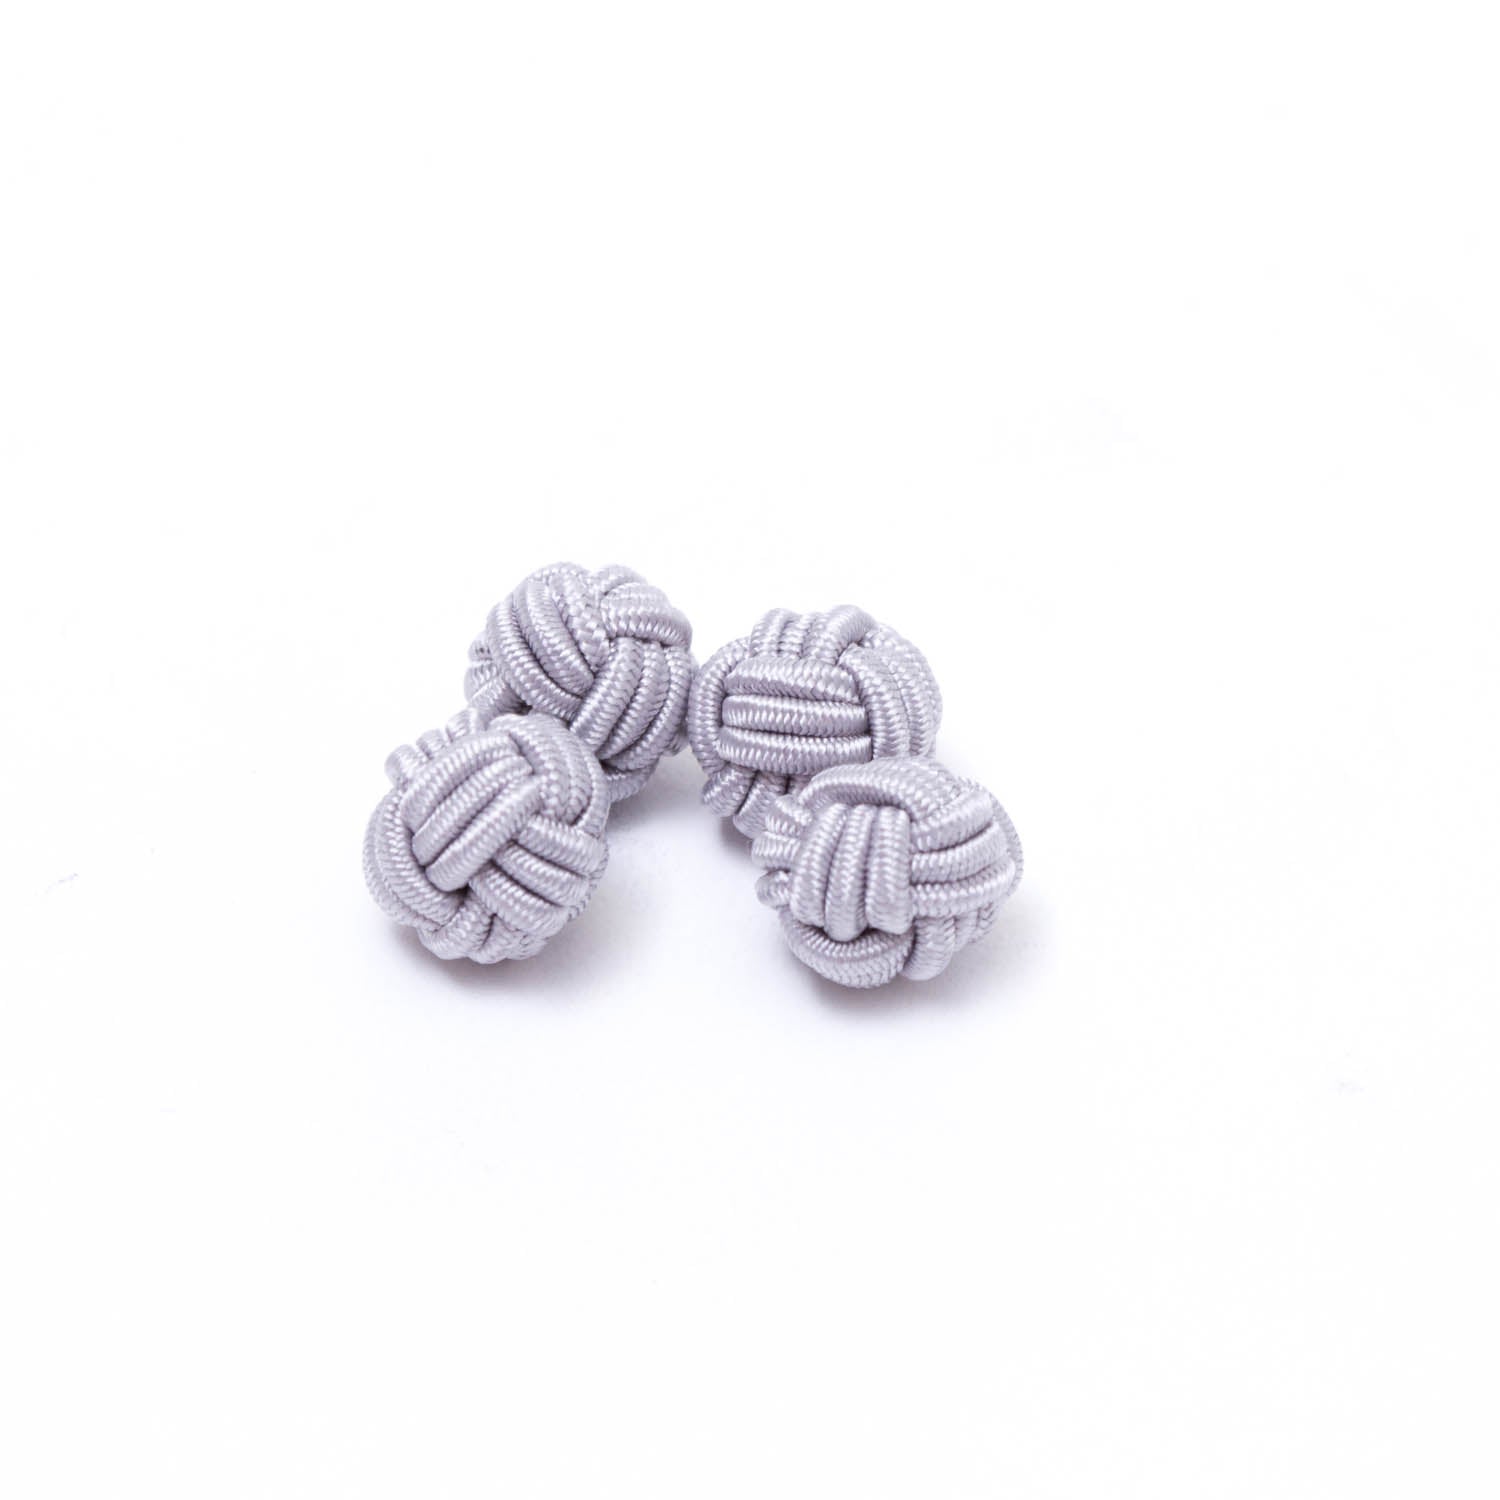 KirbyAllison.com's Solid Knot Cuff Links on a white surface.